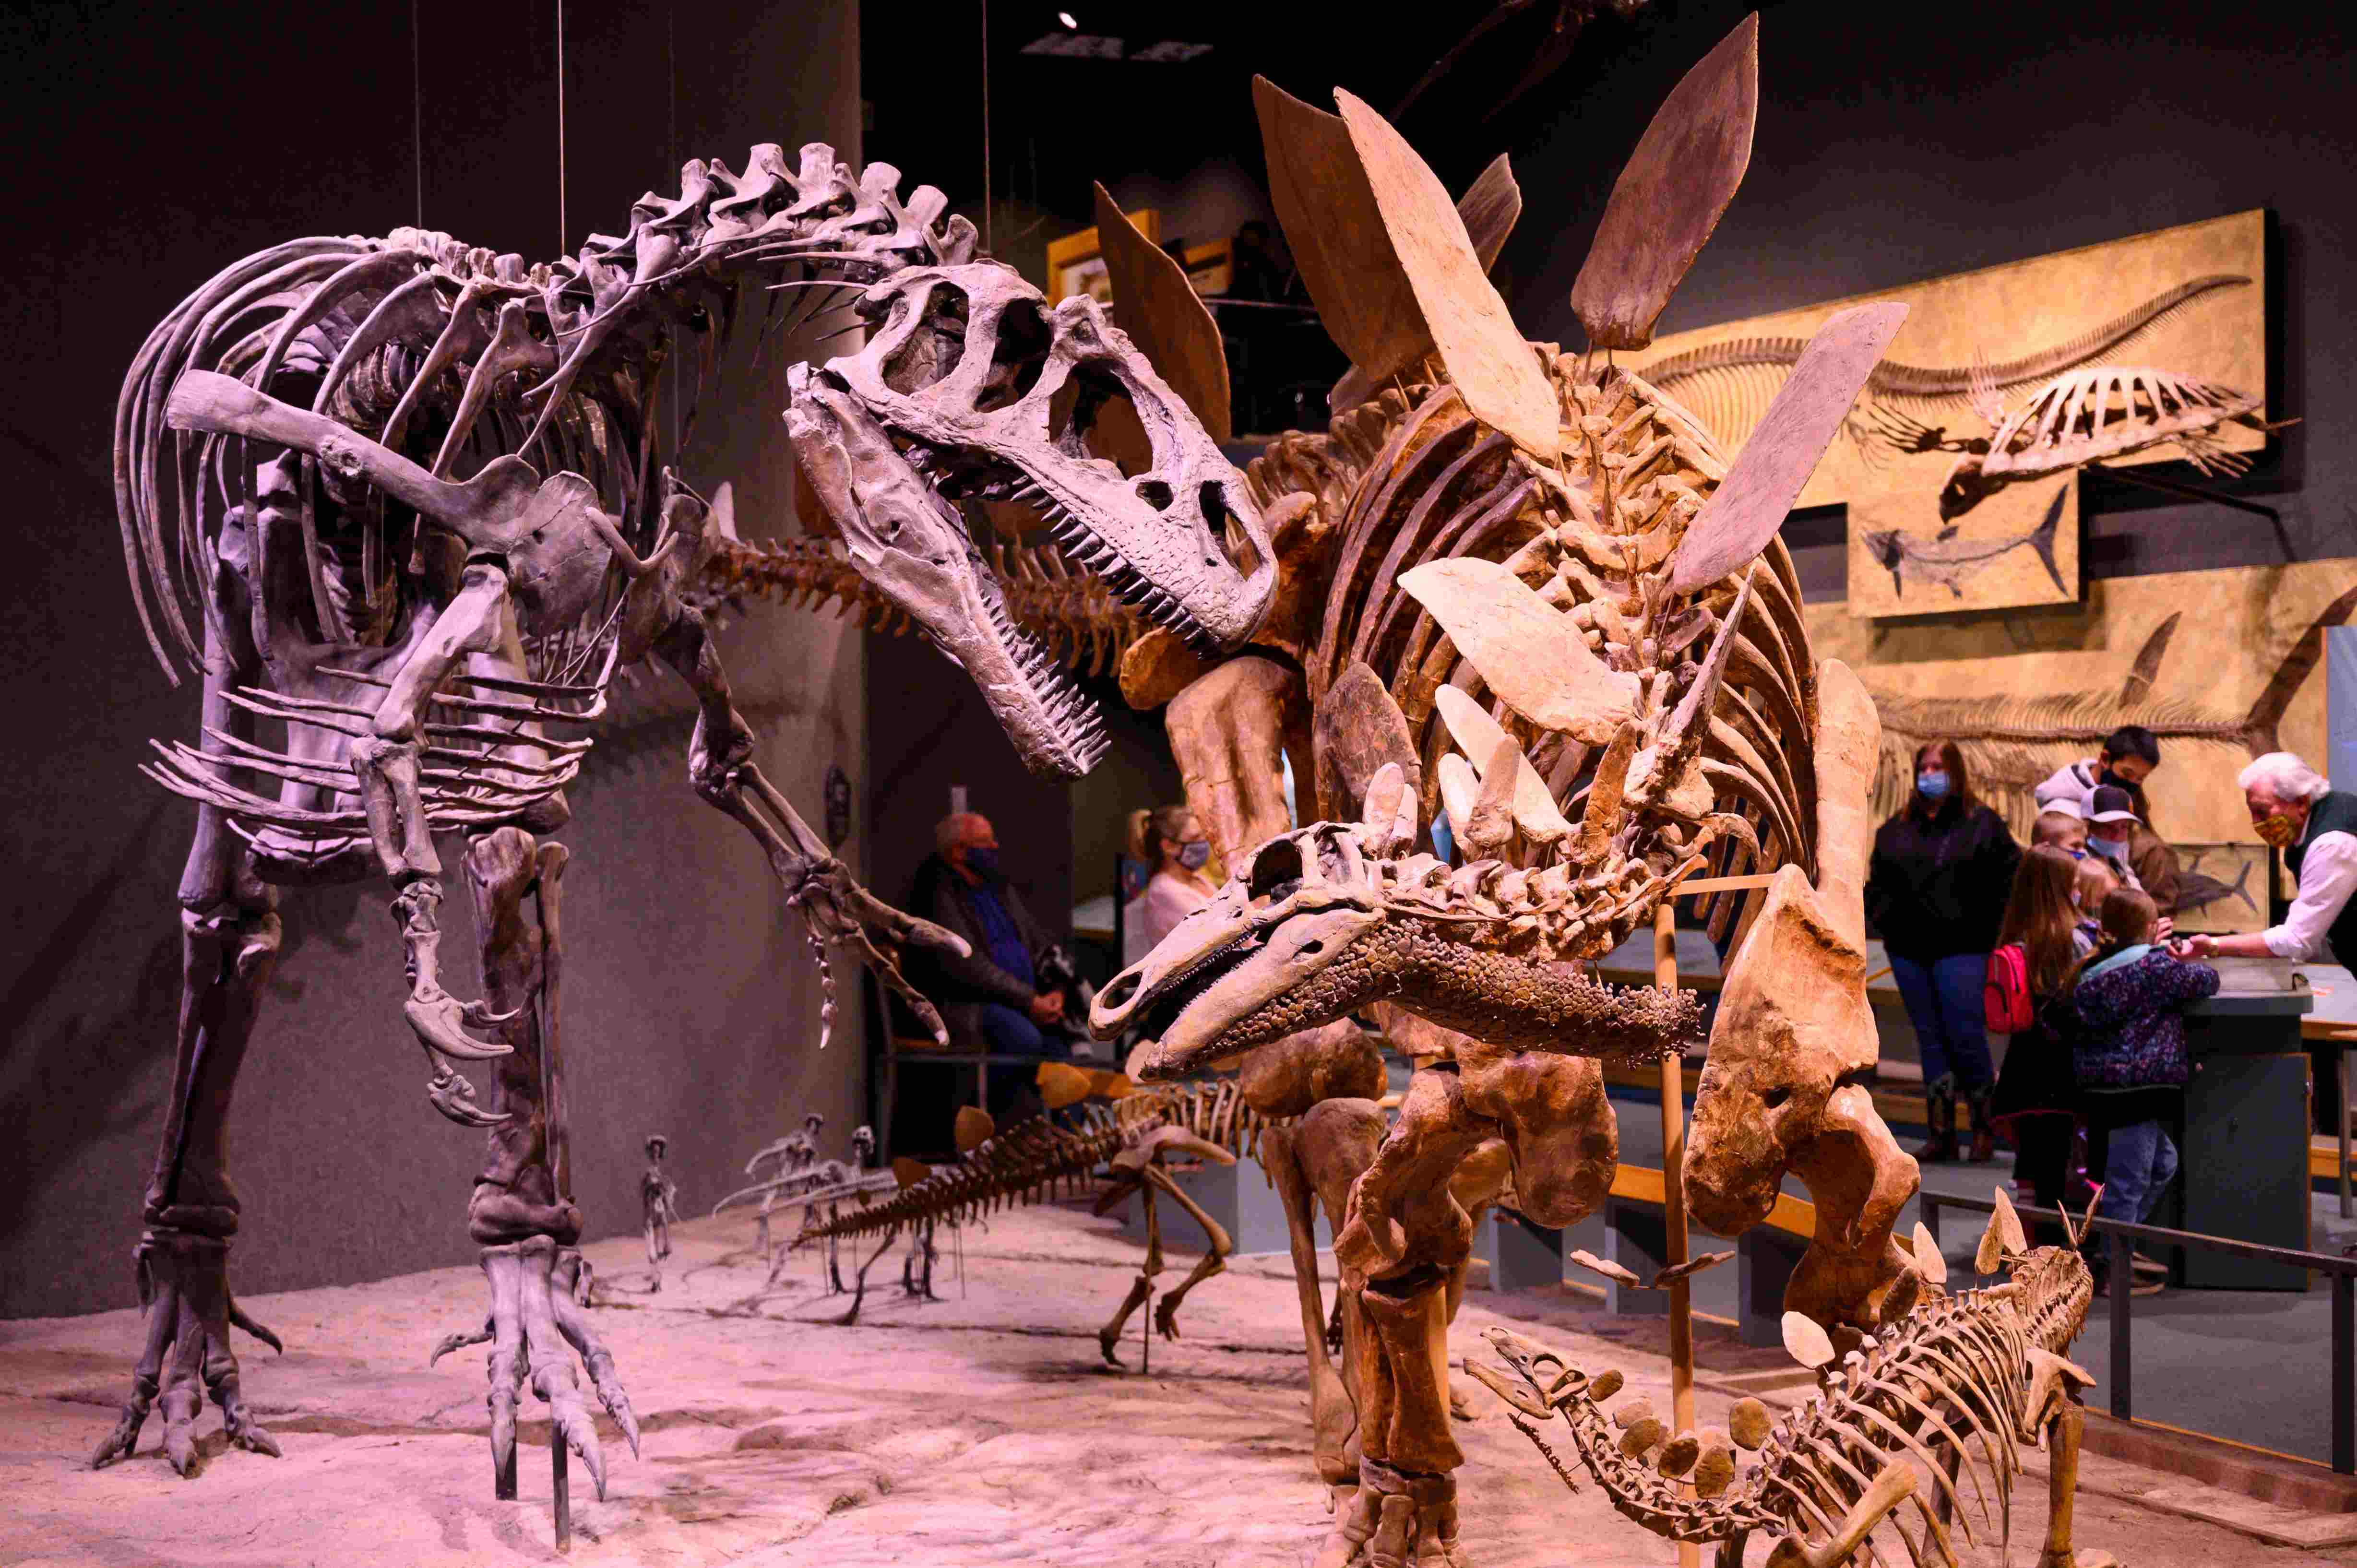 Allosaurus and Stegosaurus skeletons, the Denver Museum of Nature and Science